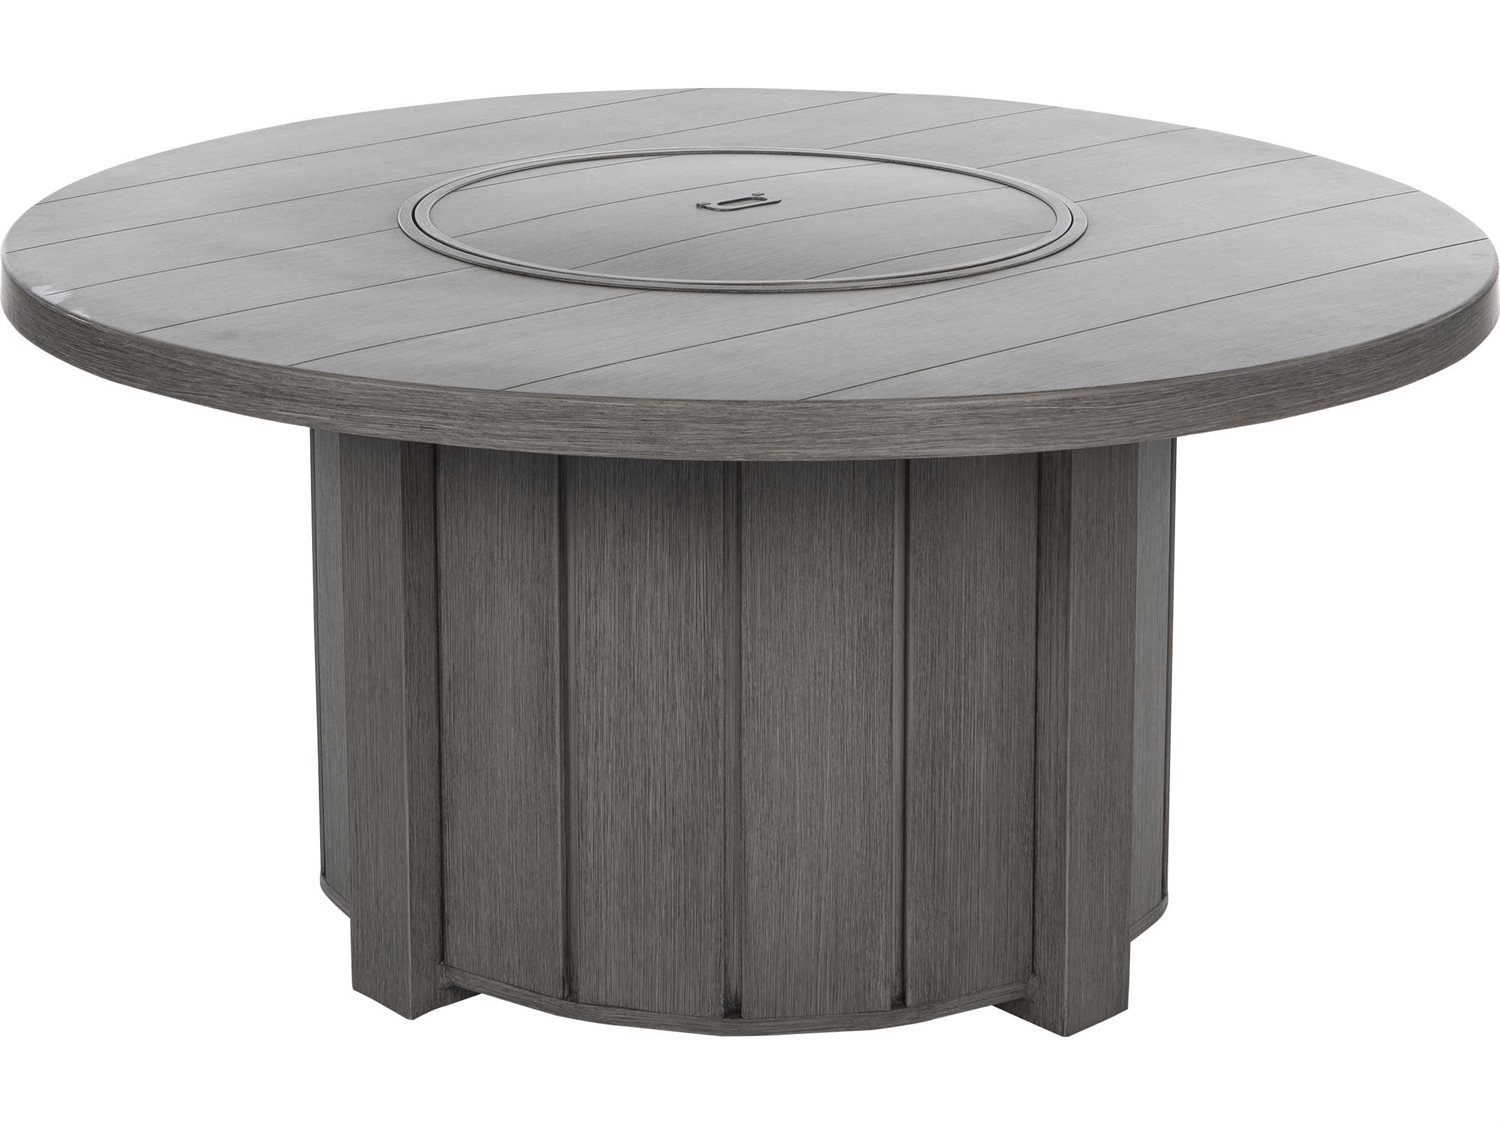 Ebel Trevi Aluminum 50 Wide Round, Circular Fire Pit Table